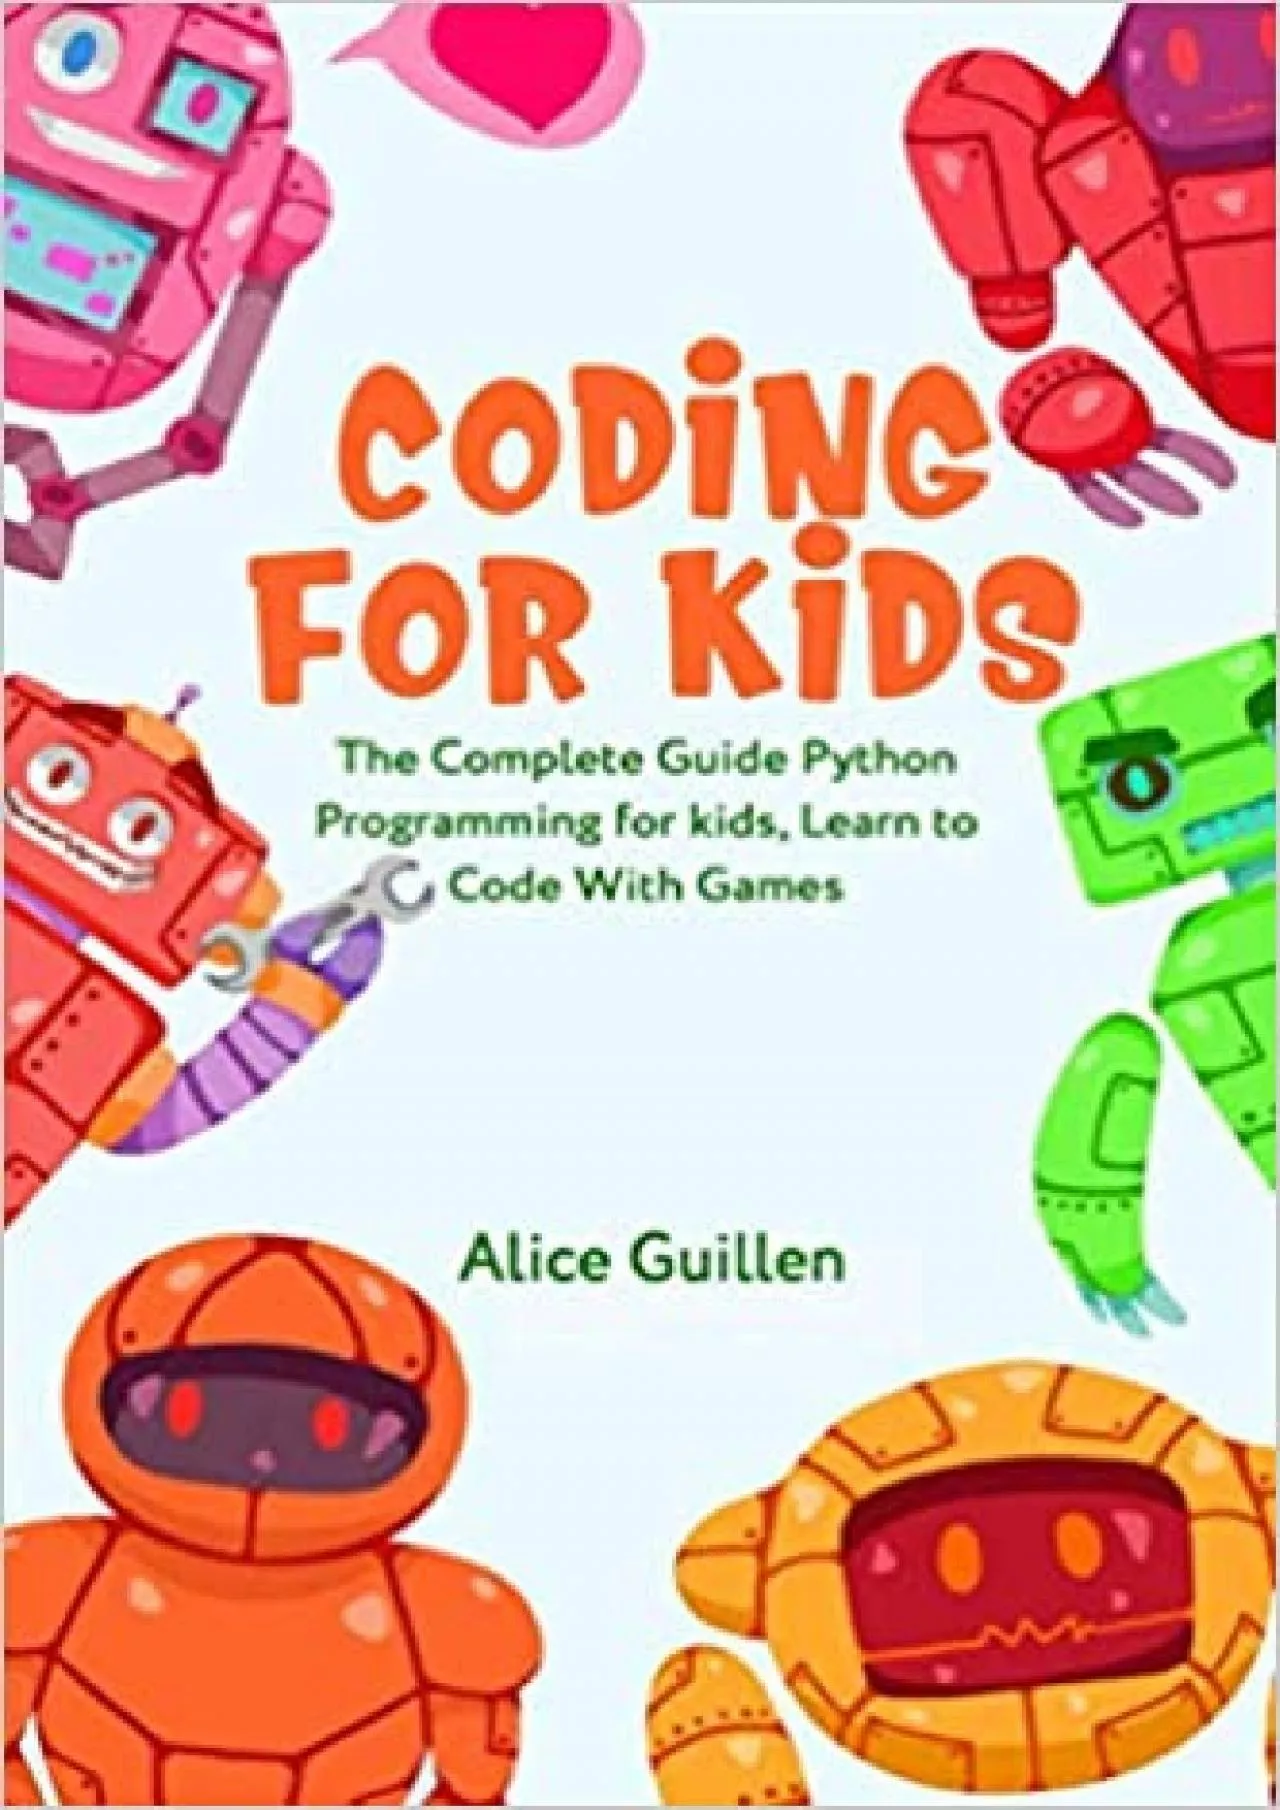 Coding for Kids The Complete Guide Python Programming for kids Learn to Code with Games